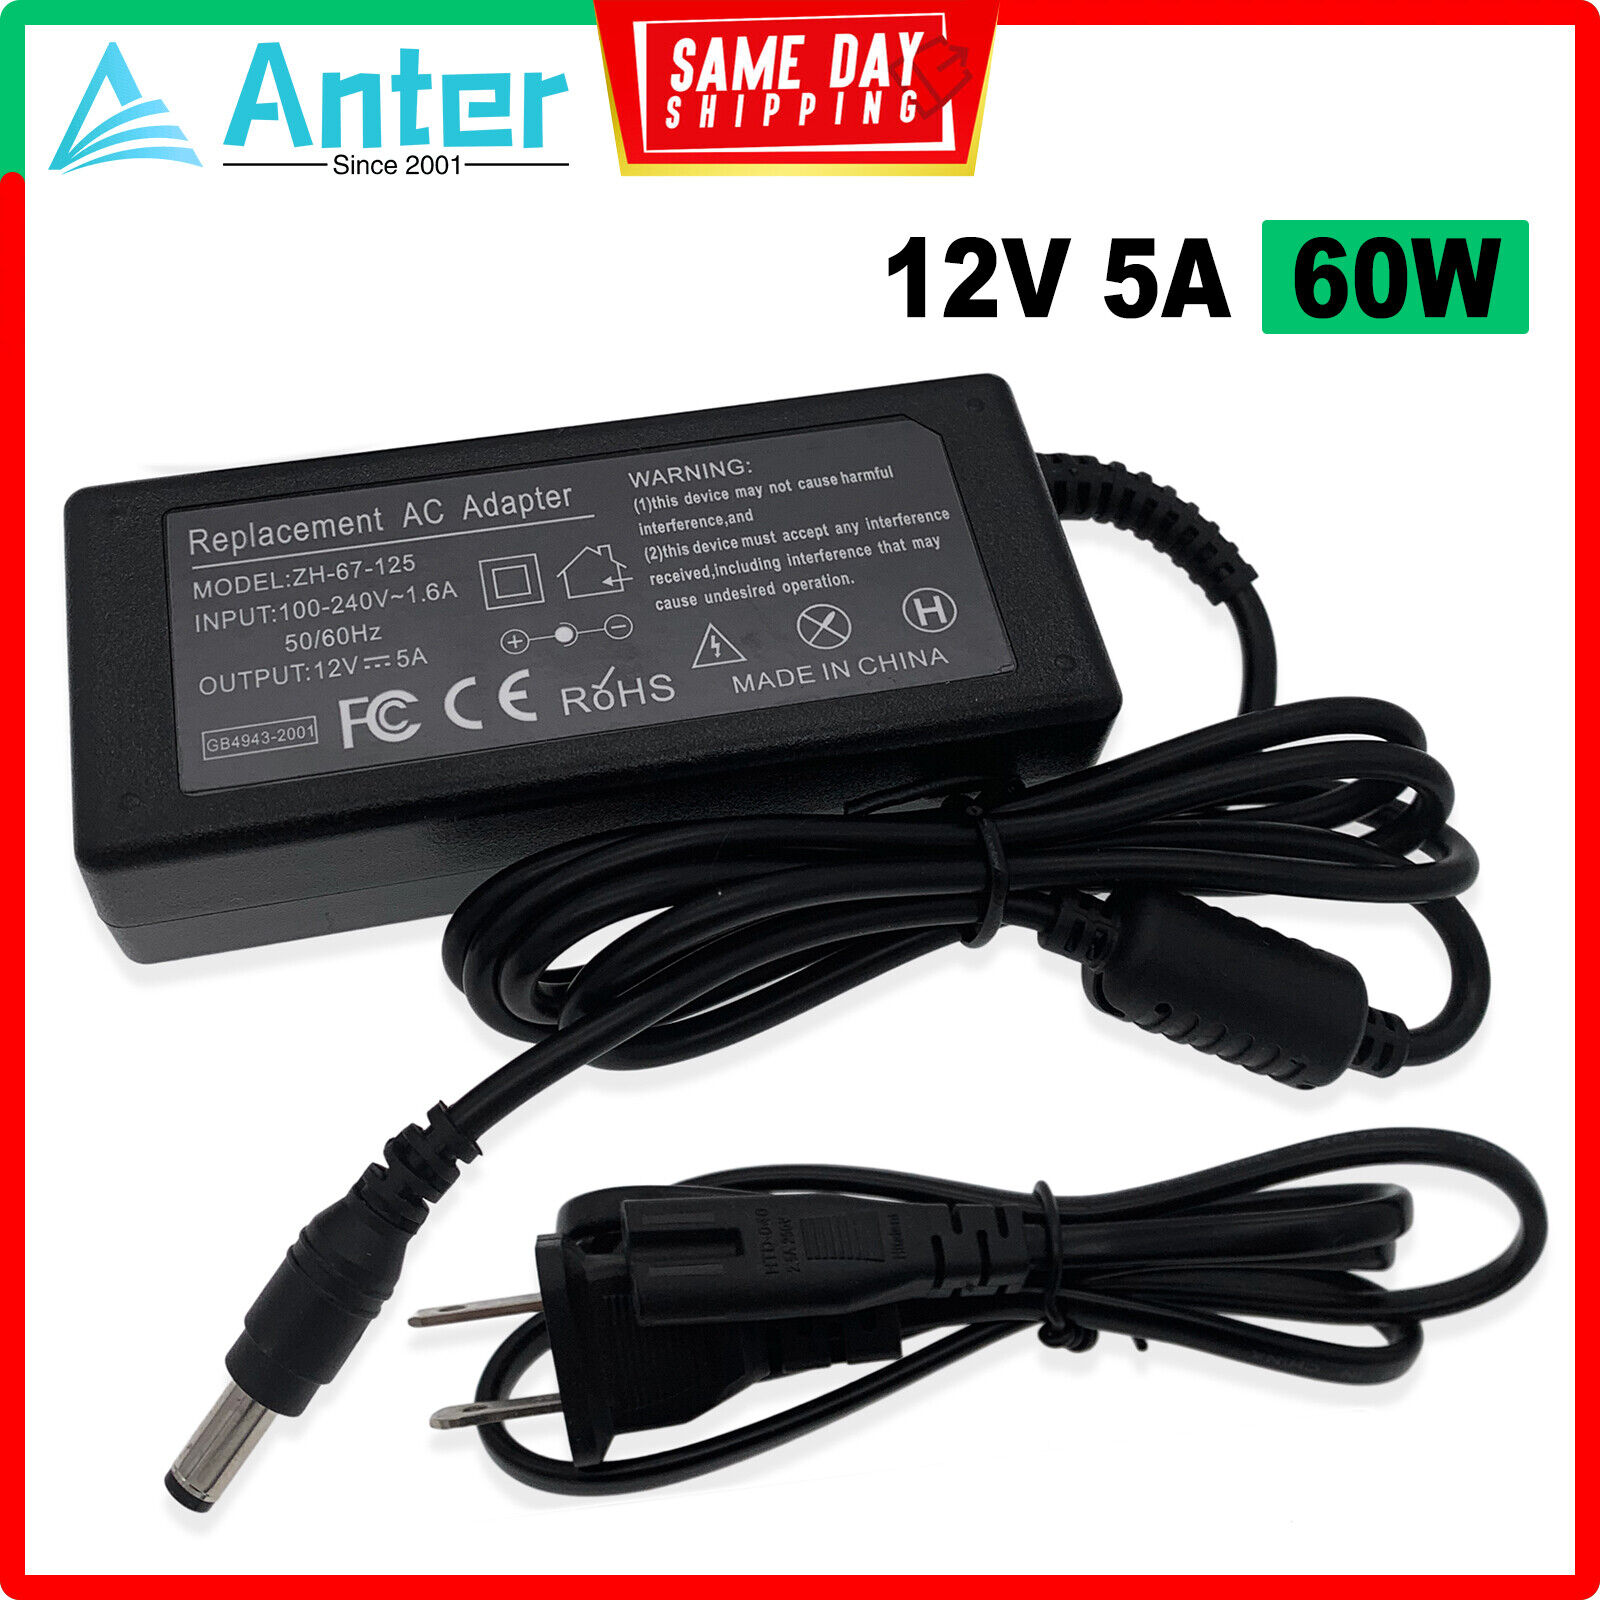 AC/DC Adapter for Peloton GEN 1 (1st Generation) Exercise Bike Power Supply Cord